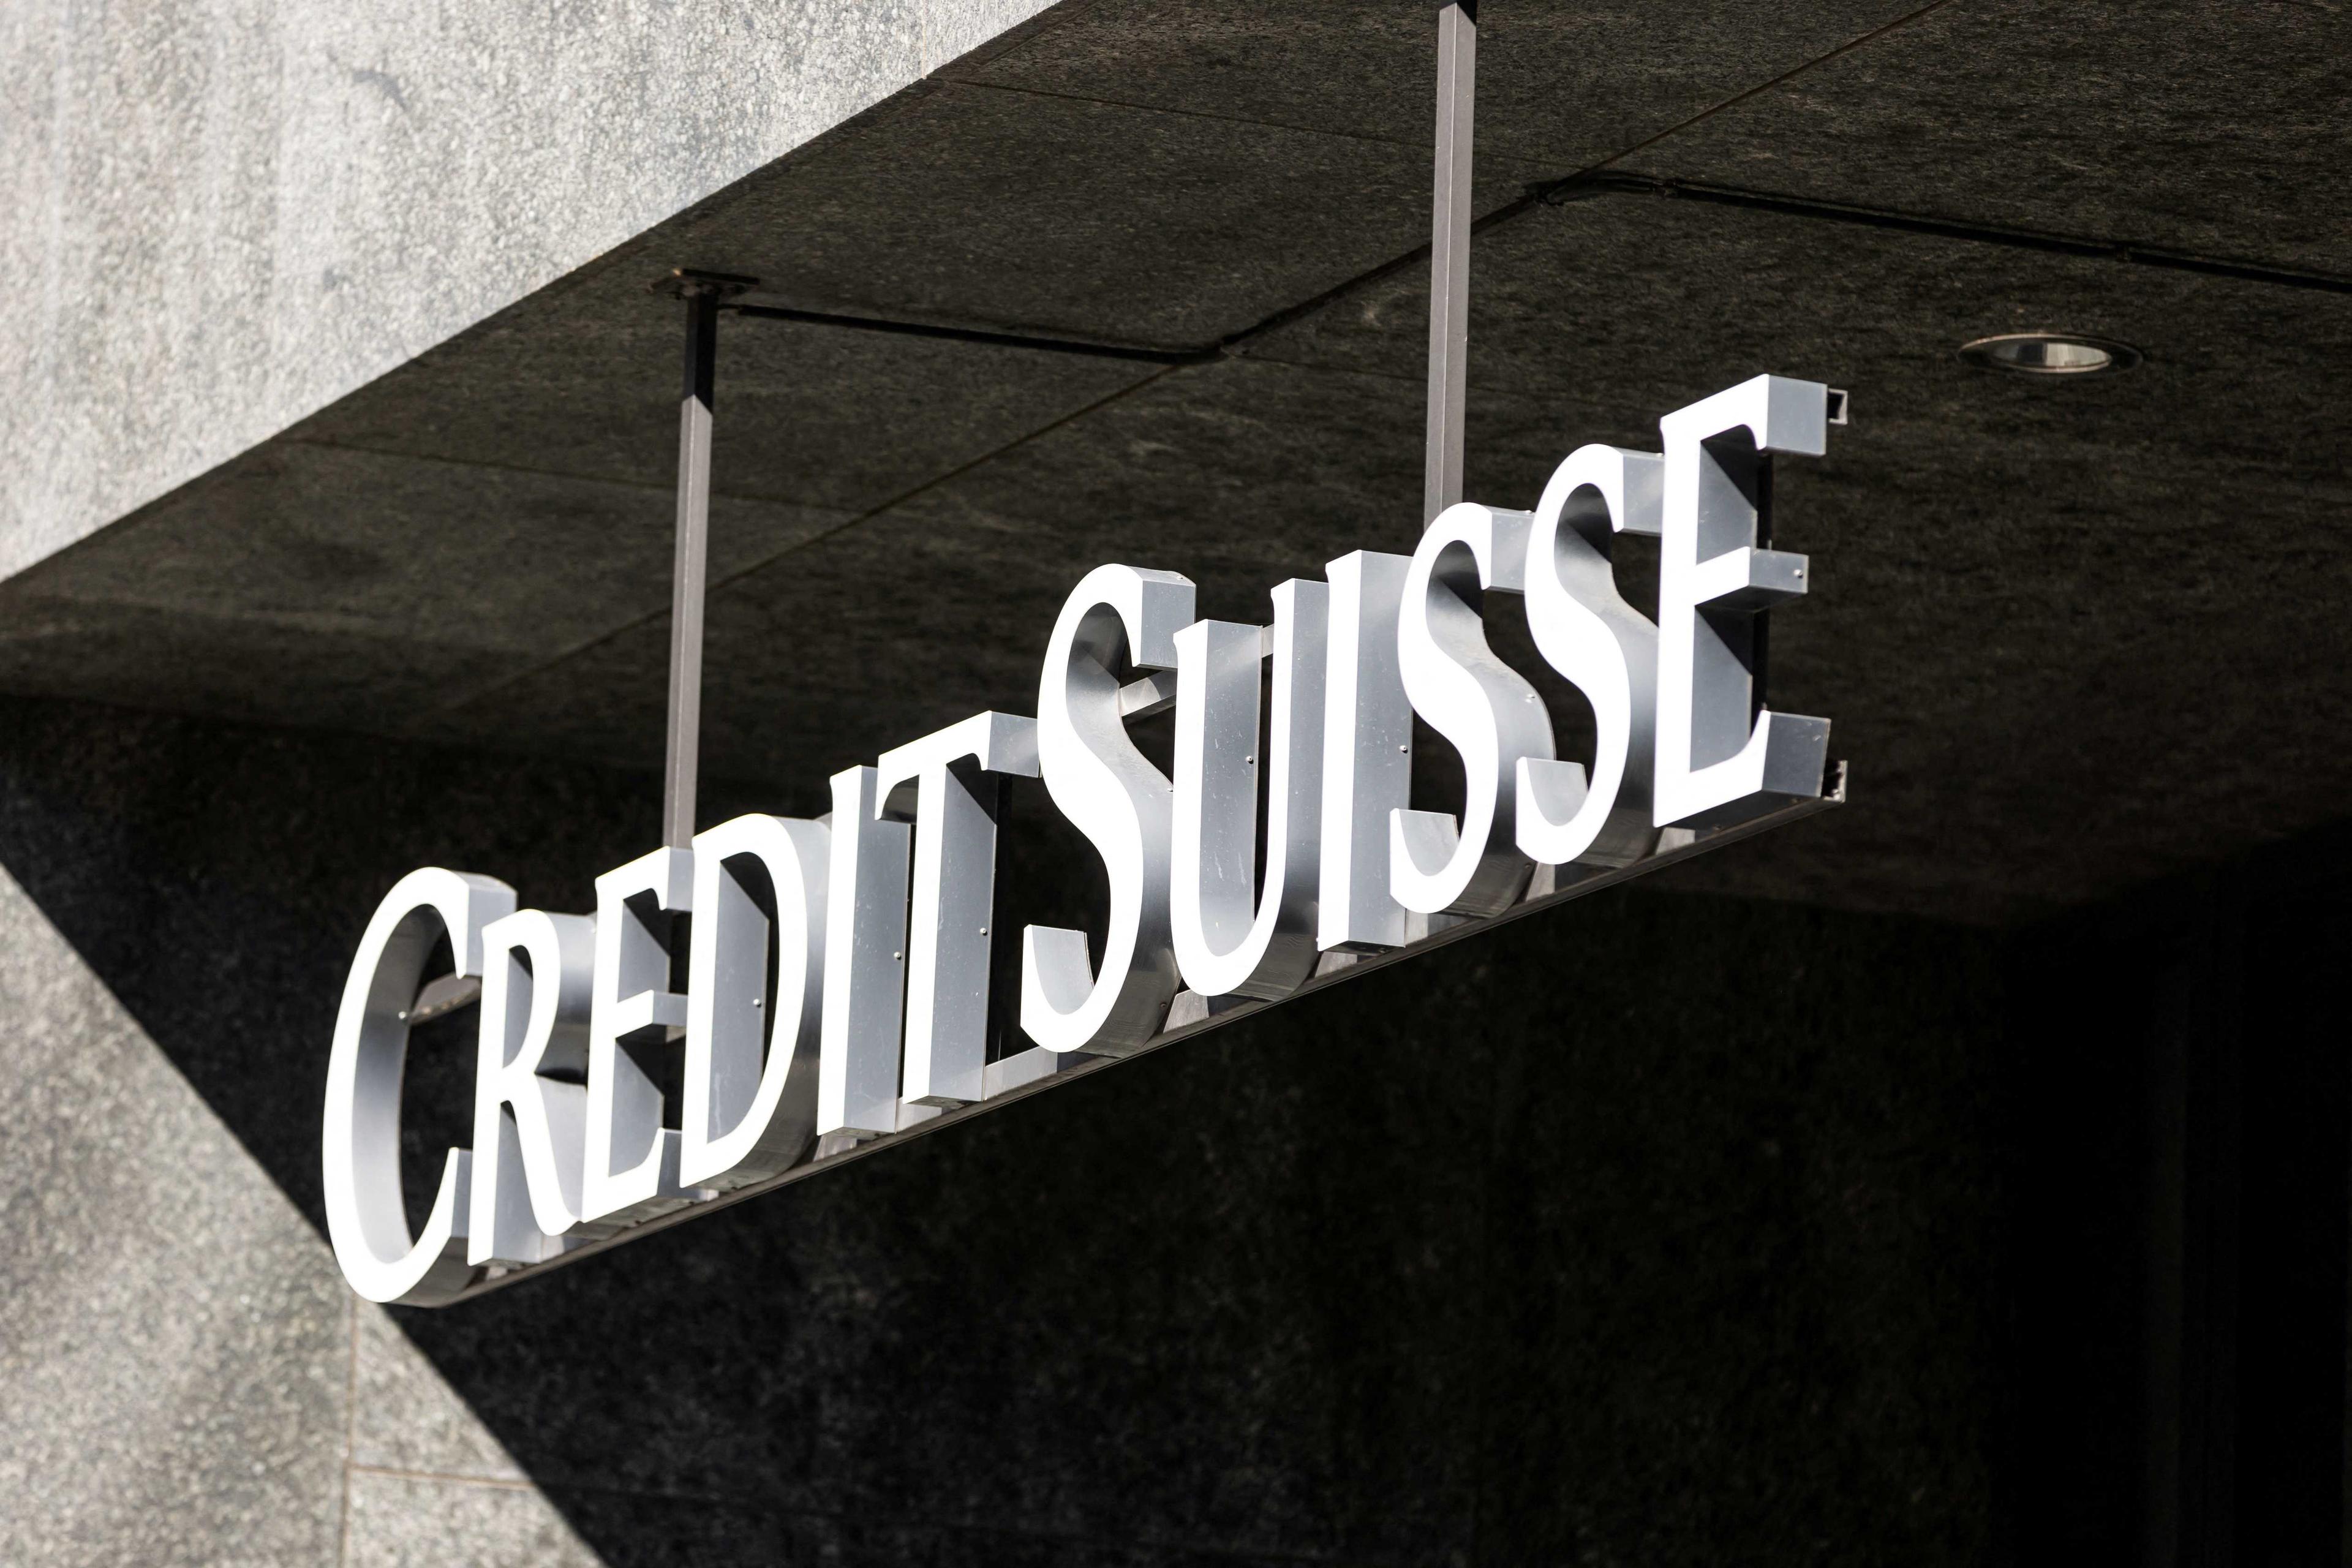 A view shows the logo of Credit Suisse on a building near the Hallenstadion in Zurich, Switzerland, April 4. Photo: Reuters